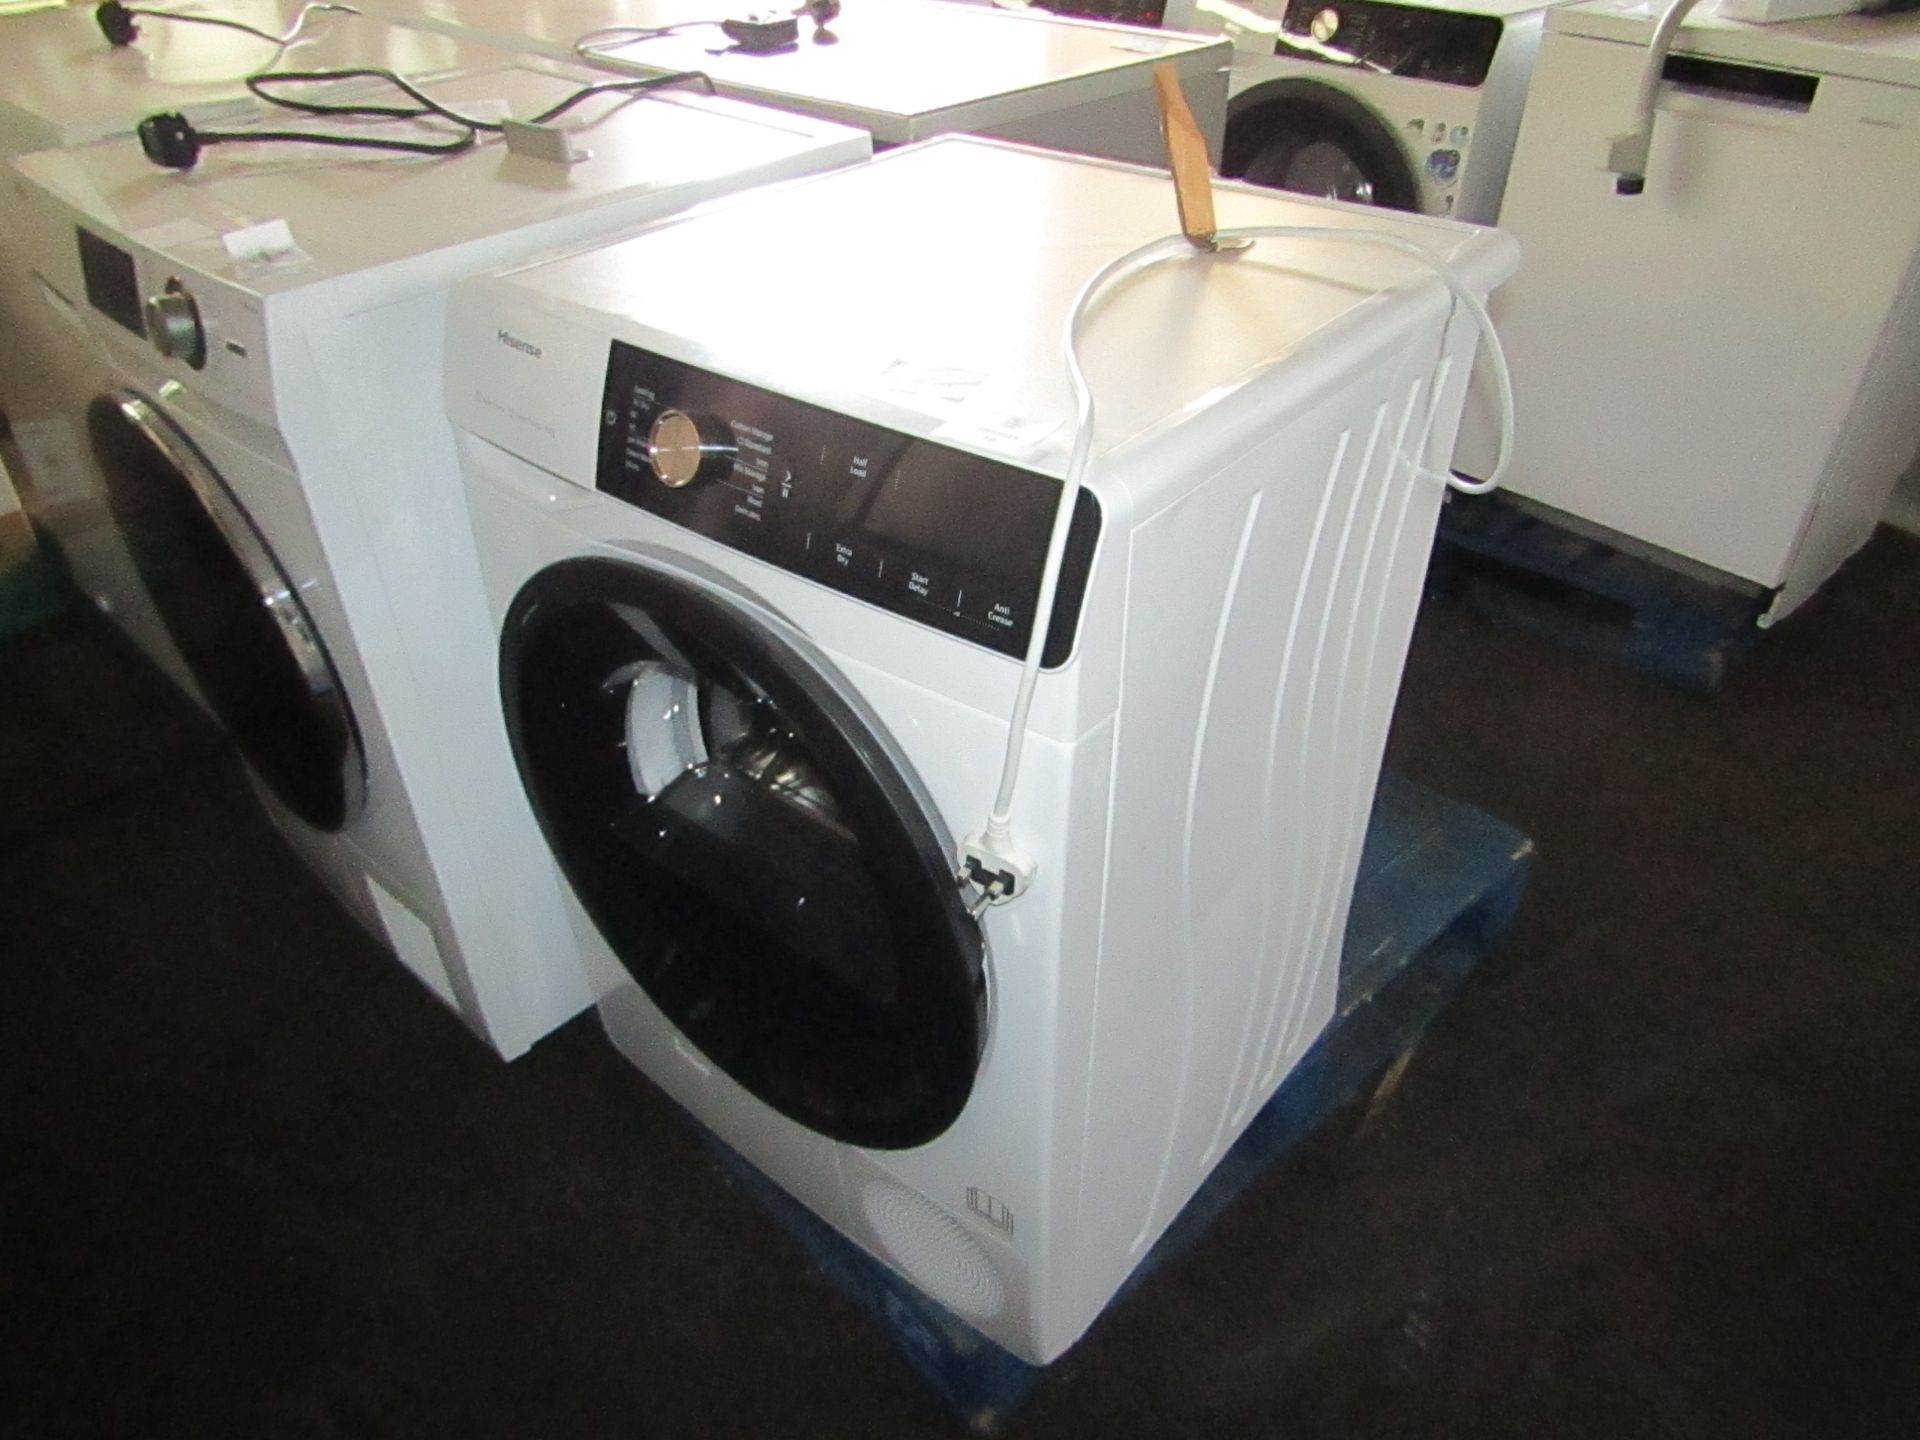 Hisense heat pump 9Kg condenser dryer, powers on and spins but unable to test heat due to room